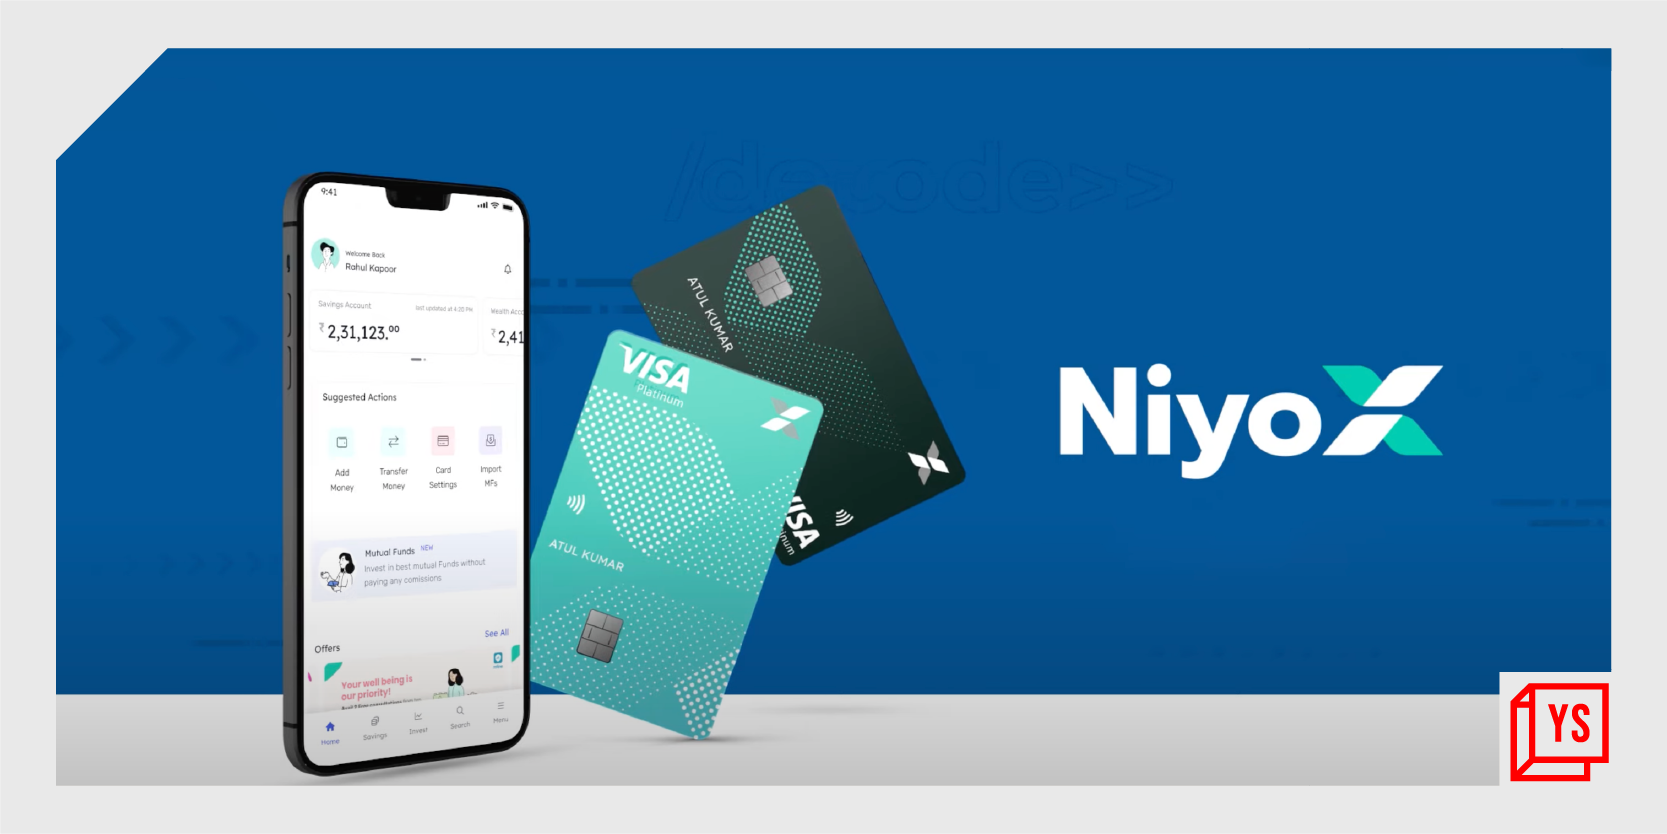 [App Friday] NiyoX has the right idea of what millennials want from banks today, but its execution is glitchy and needs fixing